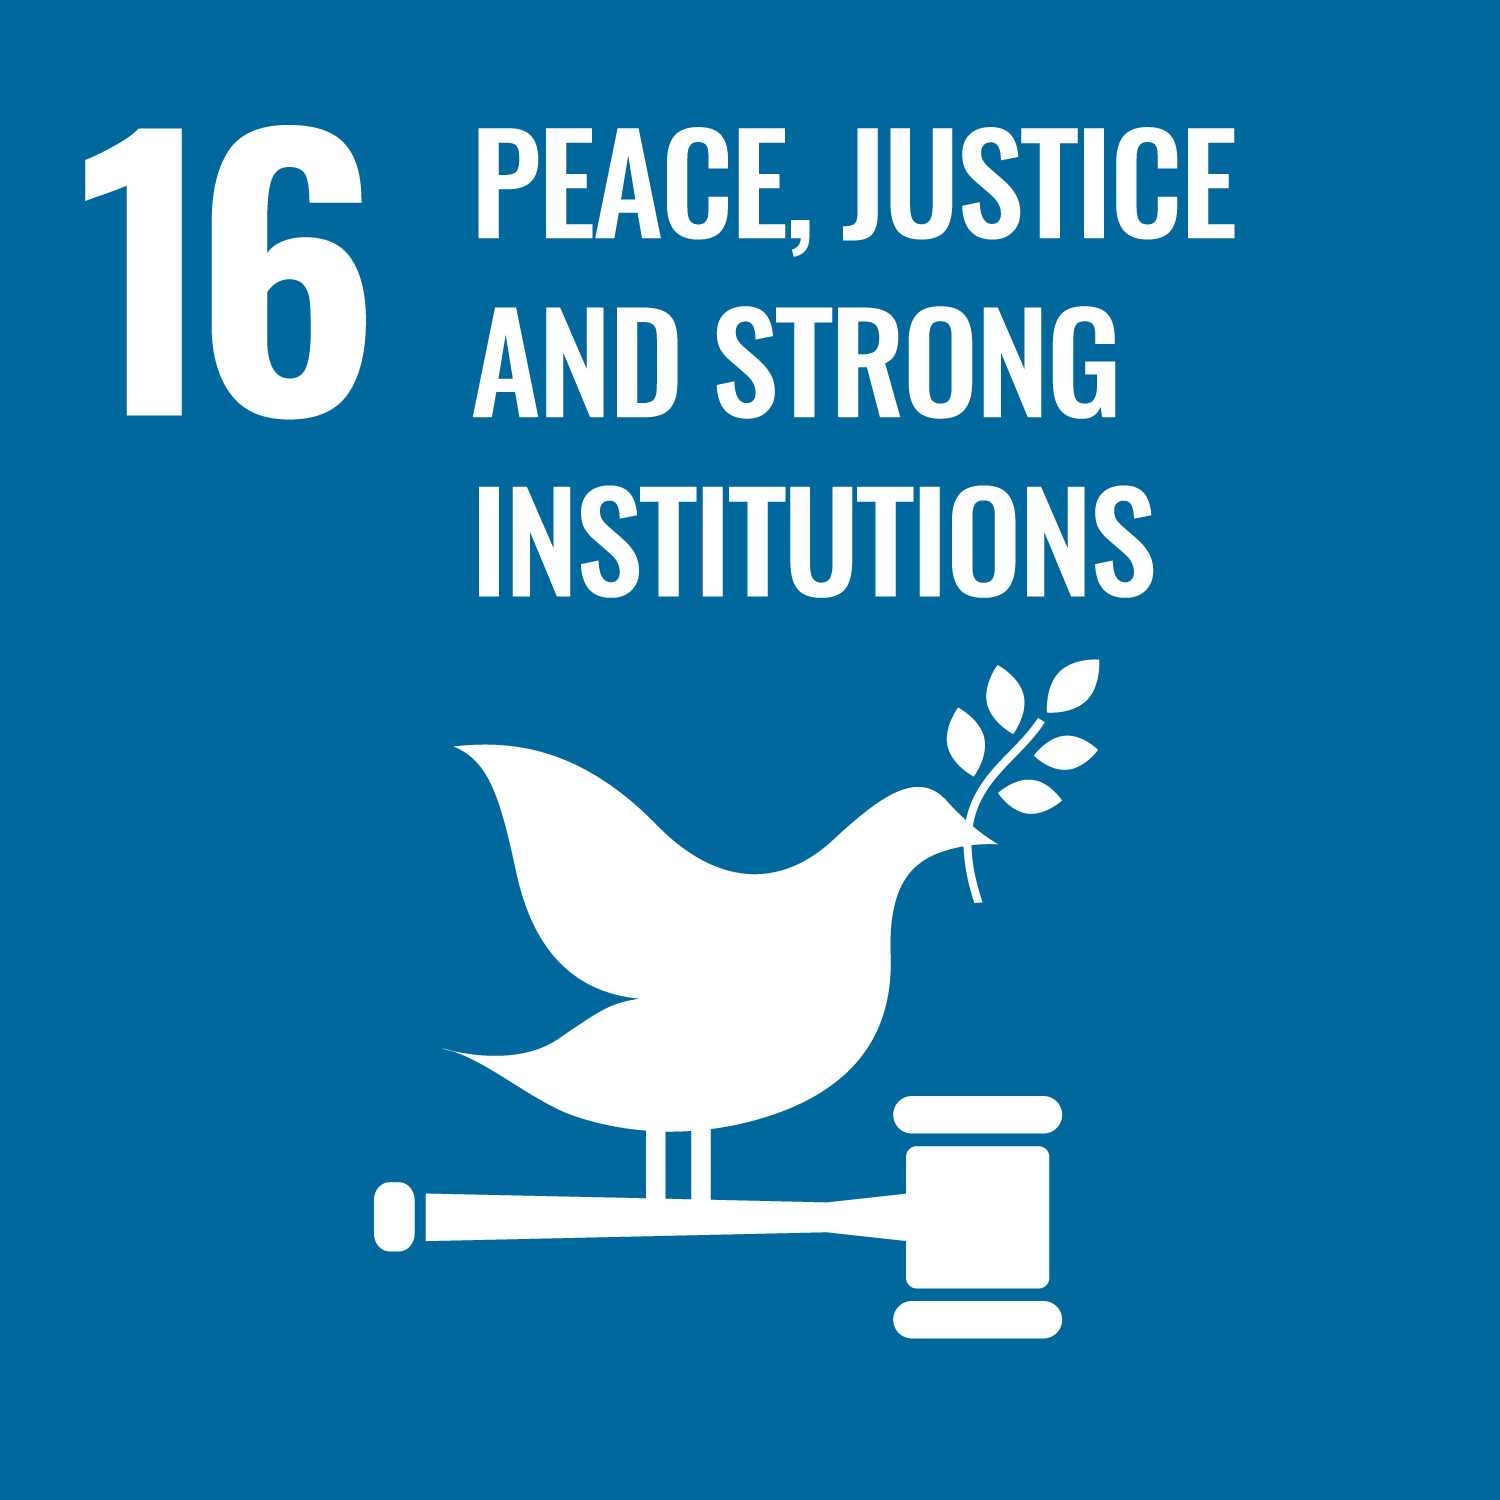 An icon of UN SDG #16 - Peace, Justice and Strong Institutions. It depicts a dove holding an olive branch standing on a gavel against a dark blue background.